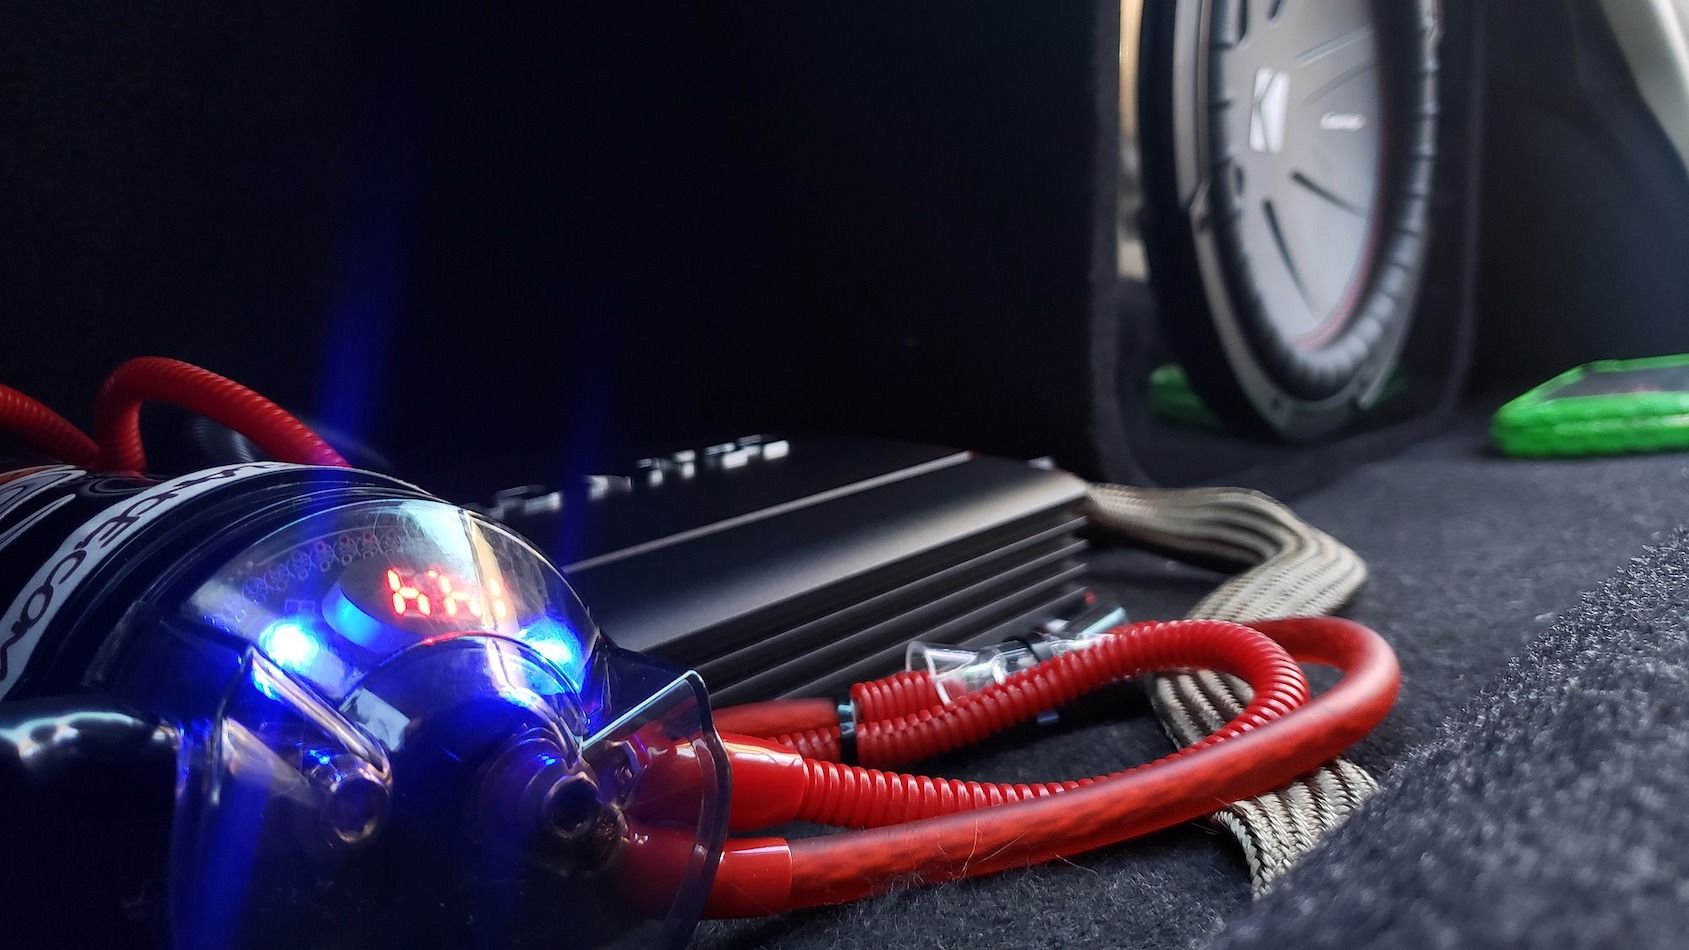 A dedicated amplifier that sends power to your component speakers